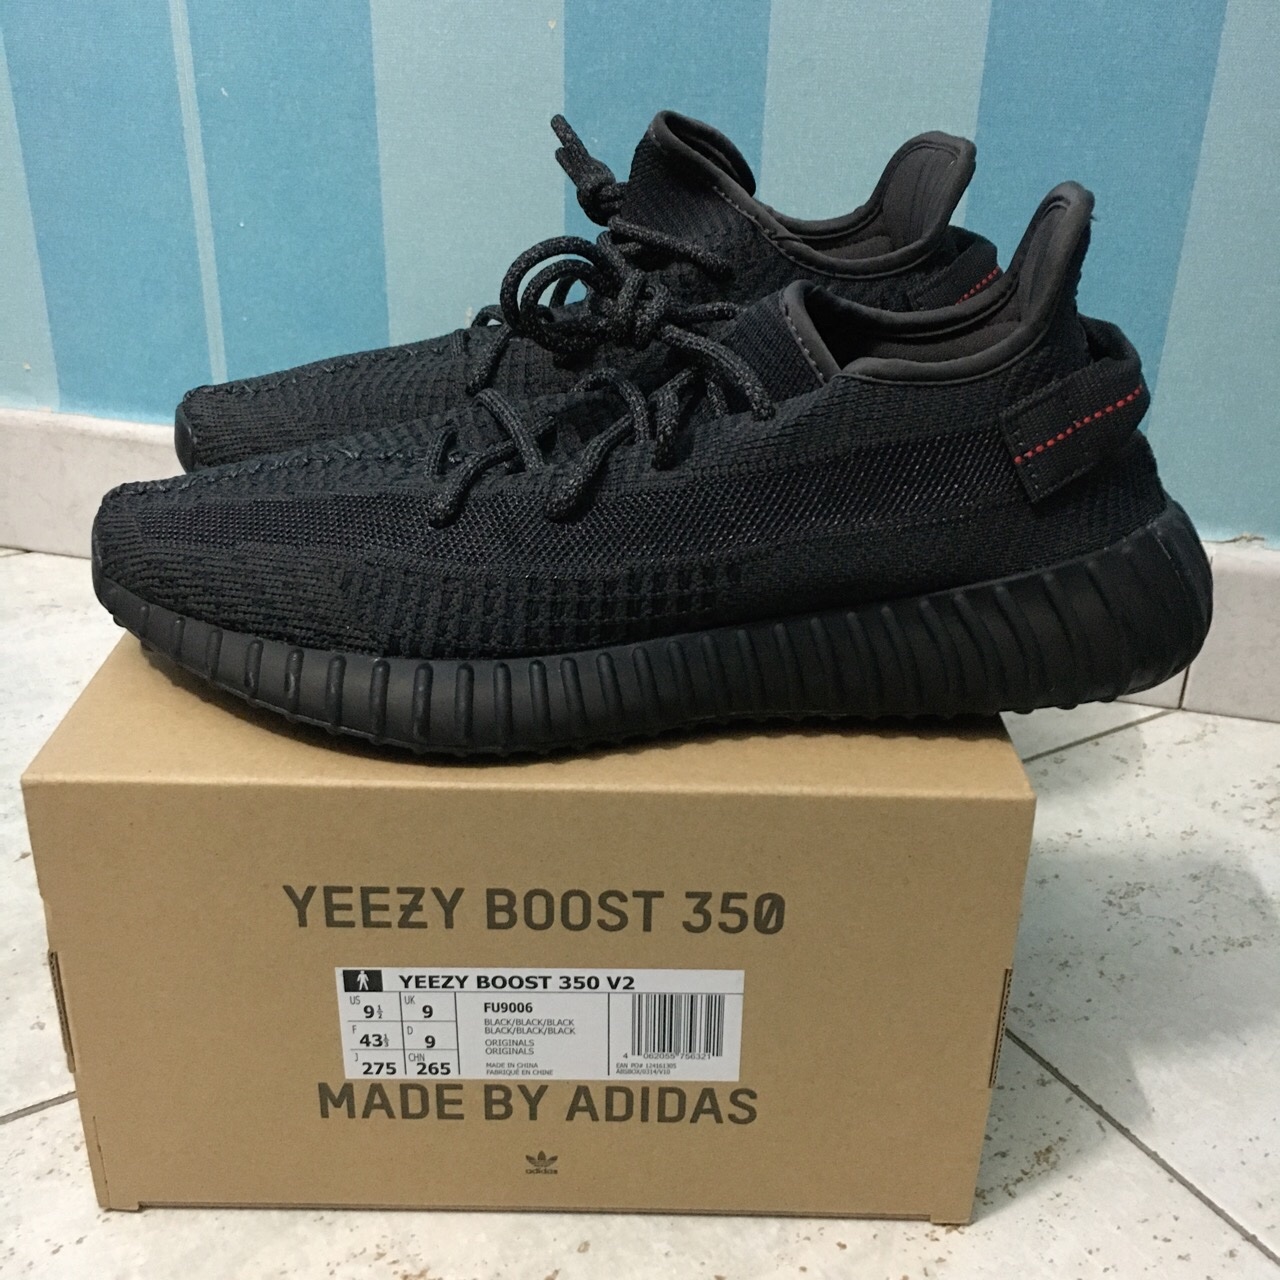 Cheap Adidas Yeezy Boost 350 V2 Hyperspace Eg7491 Menaposs Shoes Size 95 Authentic